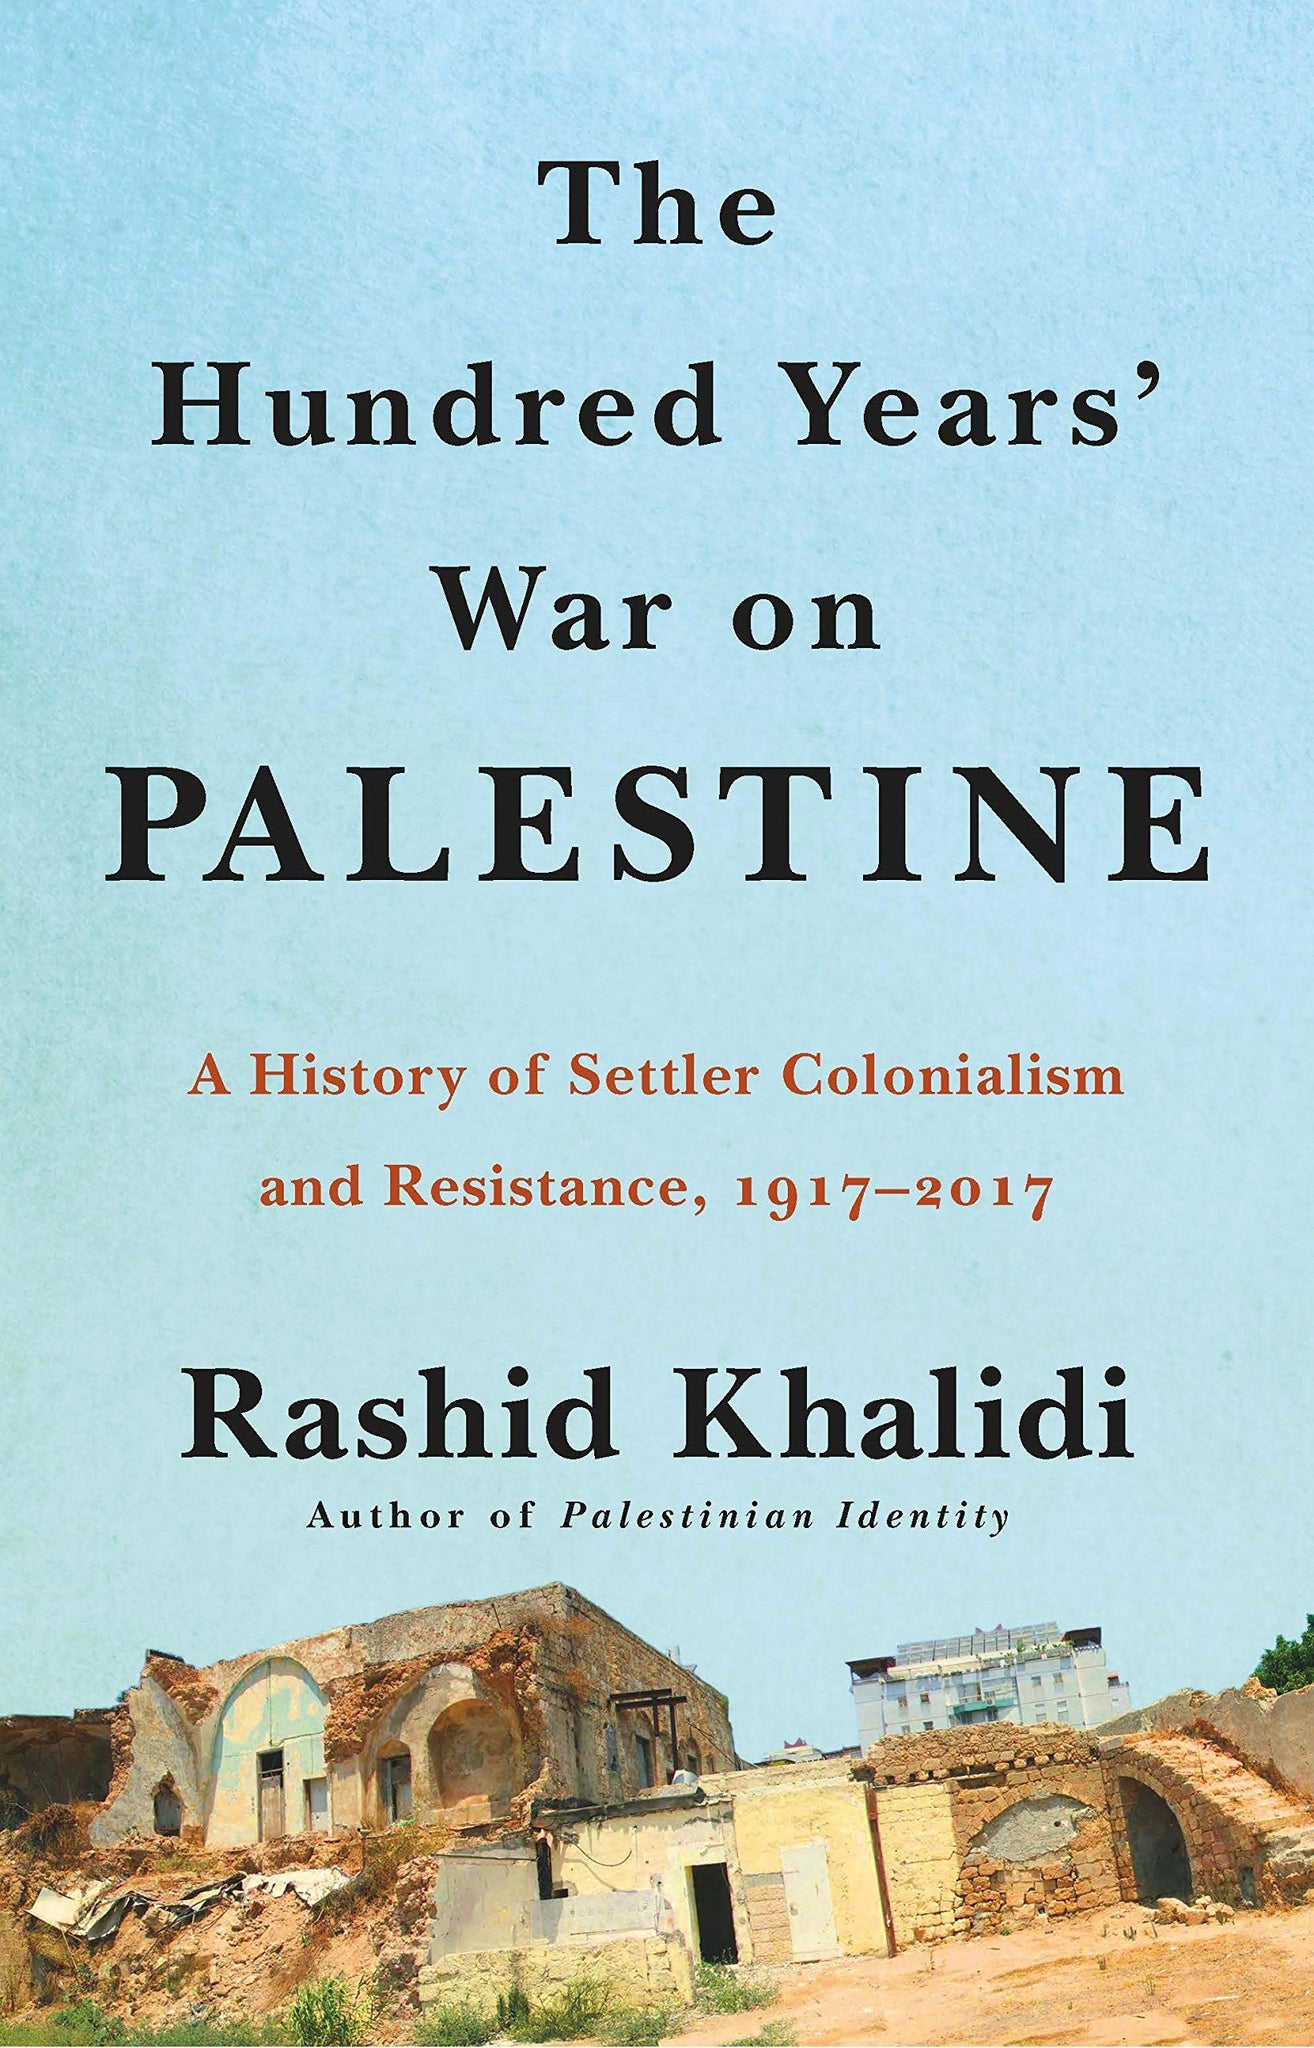 The Hundred Years' War on Palestine: A History of Settler Colonialism and Resistance, 1917-2017 (Paperback)